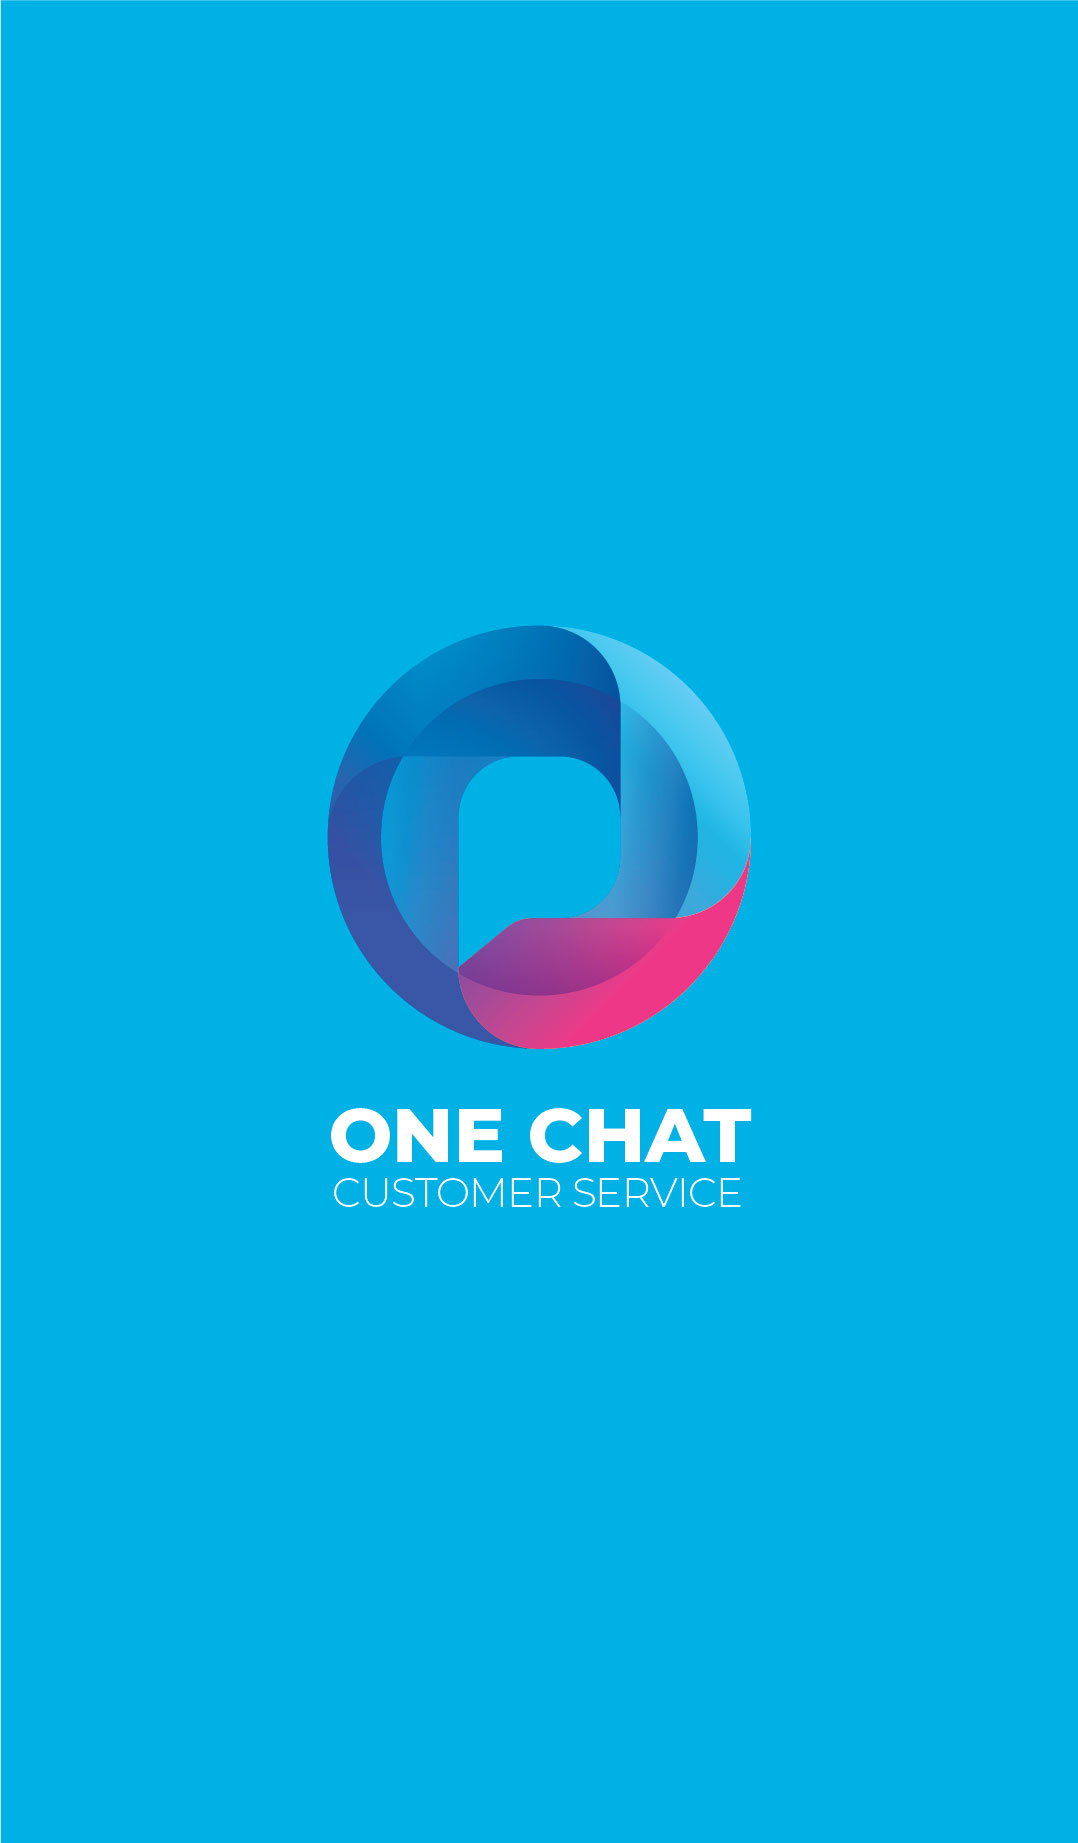 logo design service for One Chat